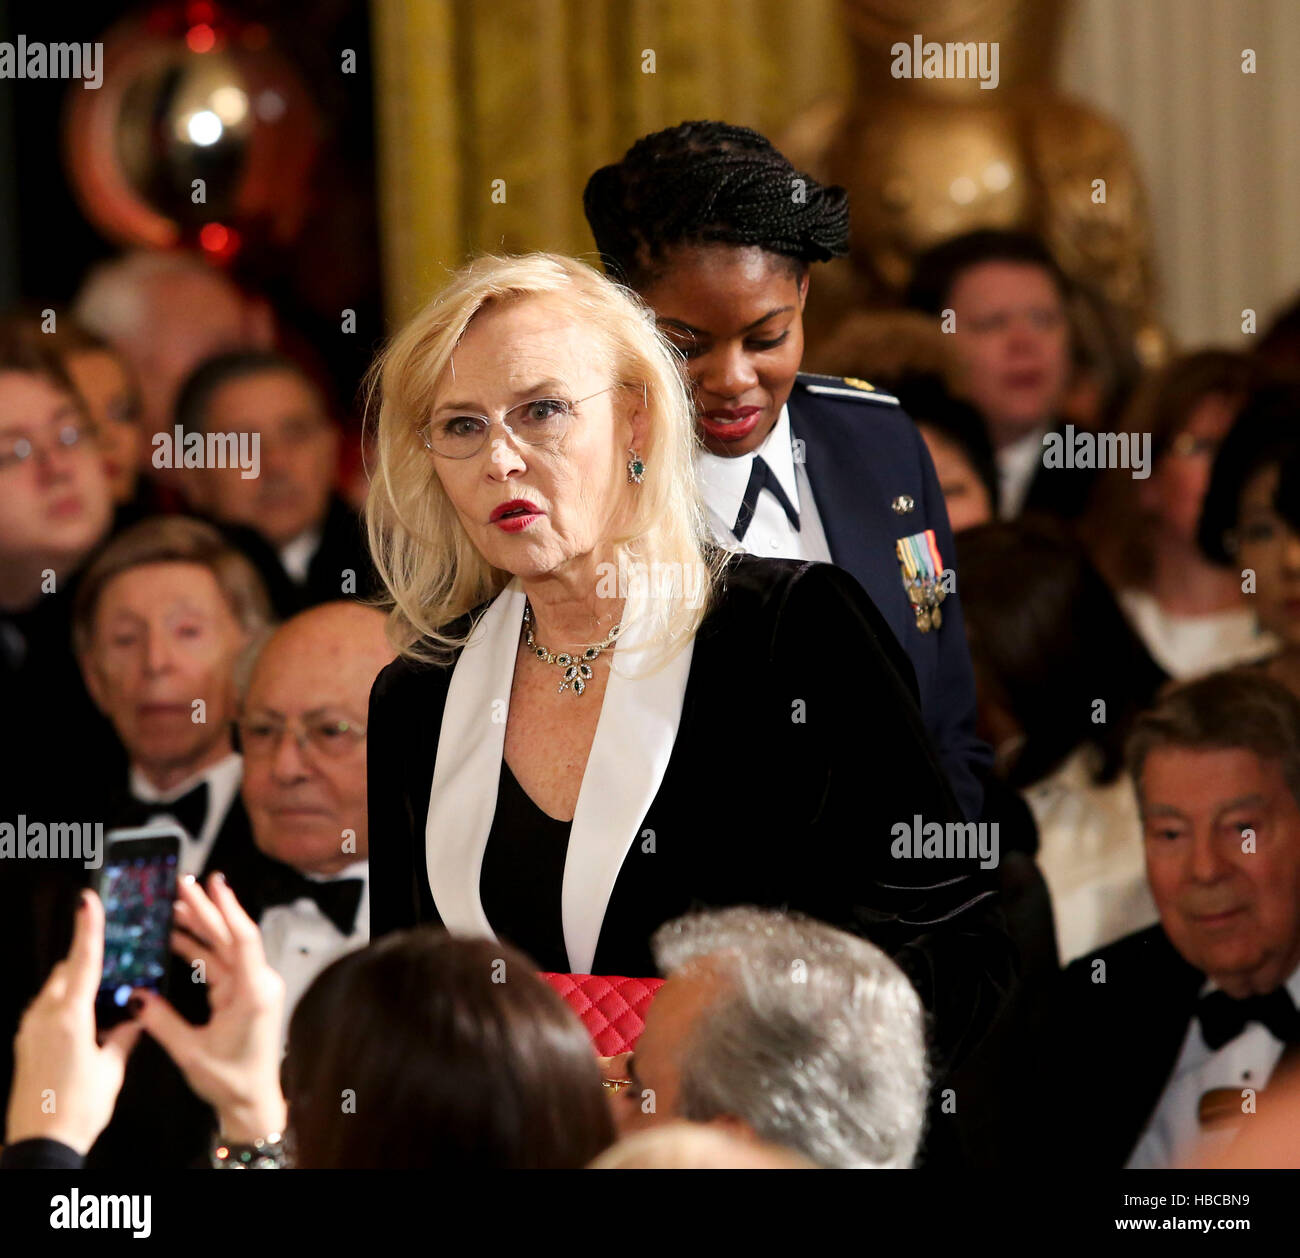 Washington DC, USA. 04th Dec, 2016. Actress Faye Dunaway arrives at an event for the 2016 Kennedy Center Honorees, in the East Room of the White House, December 4, 2016. The 2016 honorees are: Argentine pianist Martha Argerich; rock band the Eagles; screen and stage actor Al Pacino; gospel and blues singer Mavis Staples; and musician James Taylor. Credit: Aude Guerrucci/Pool via CNP /MediaPunch Credit:  MediaPunch Inc/Alamy Live News Stock Photo